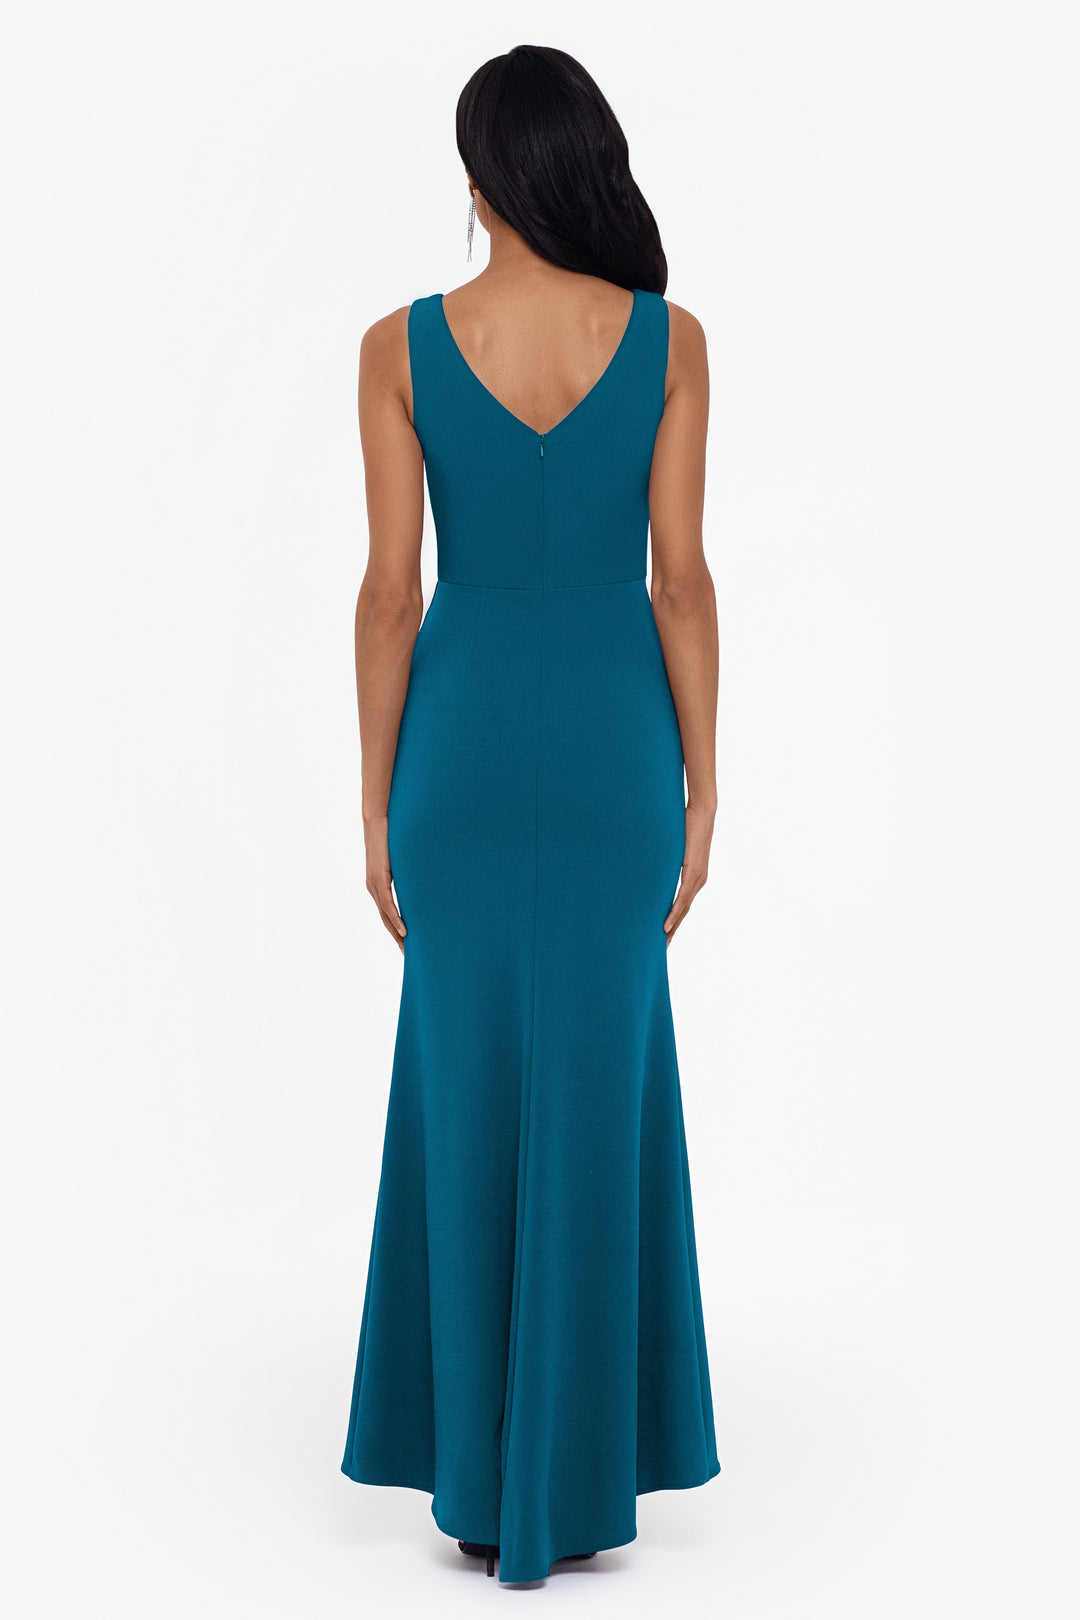 "Christine" Scuba Crepe Ruffled Bow Gown - Betsy & Adam